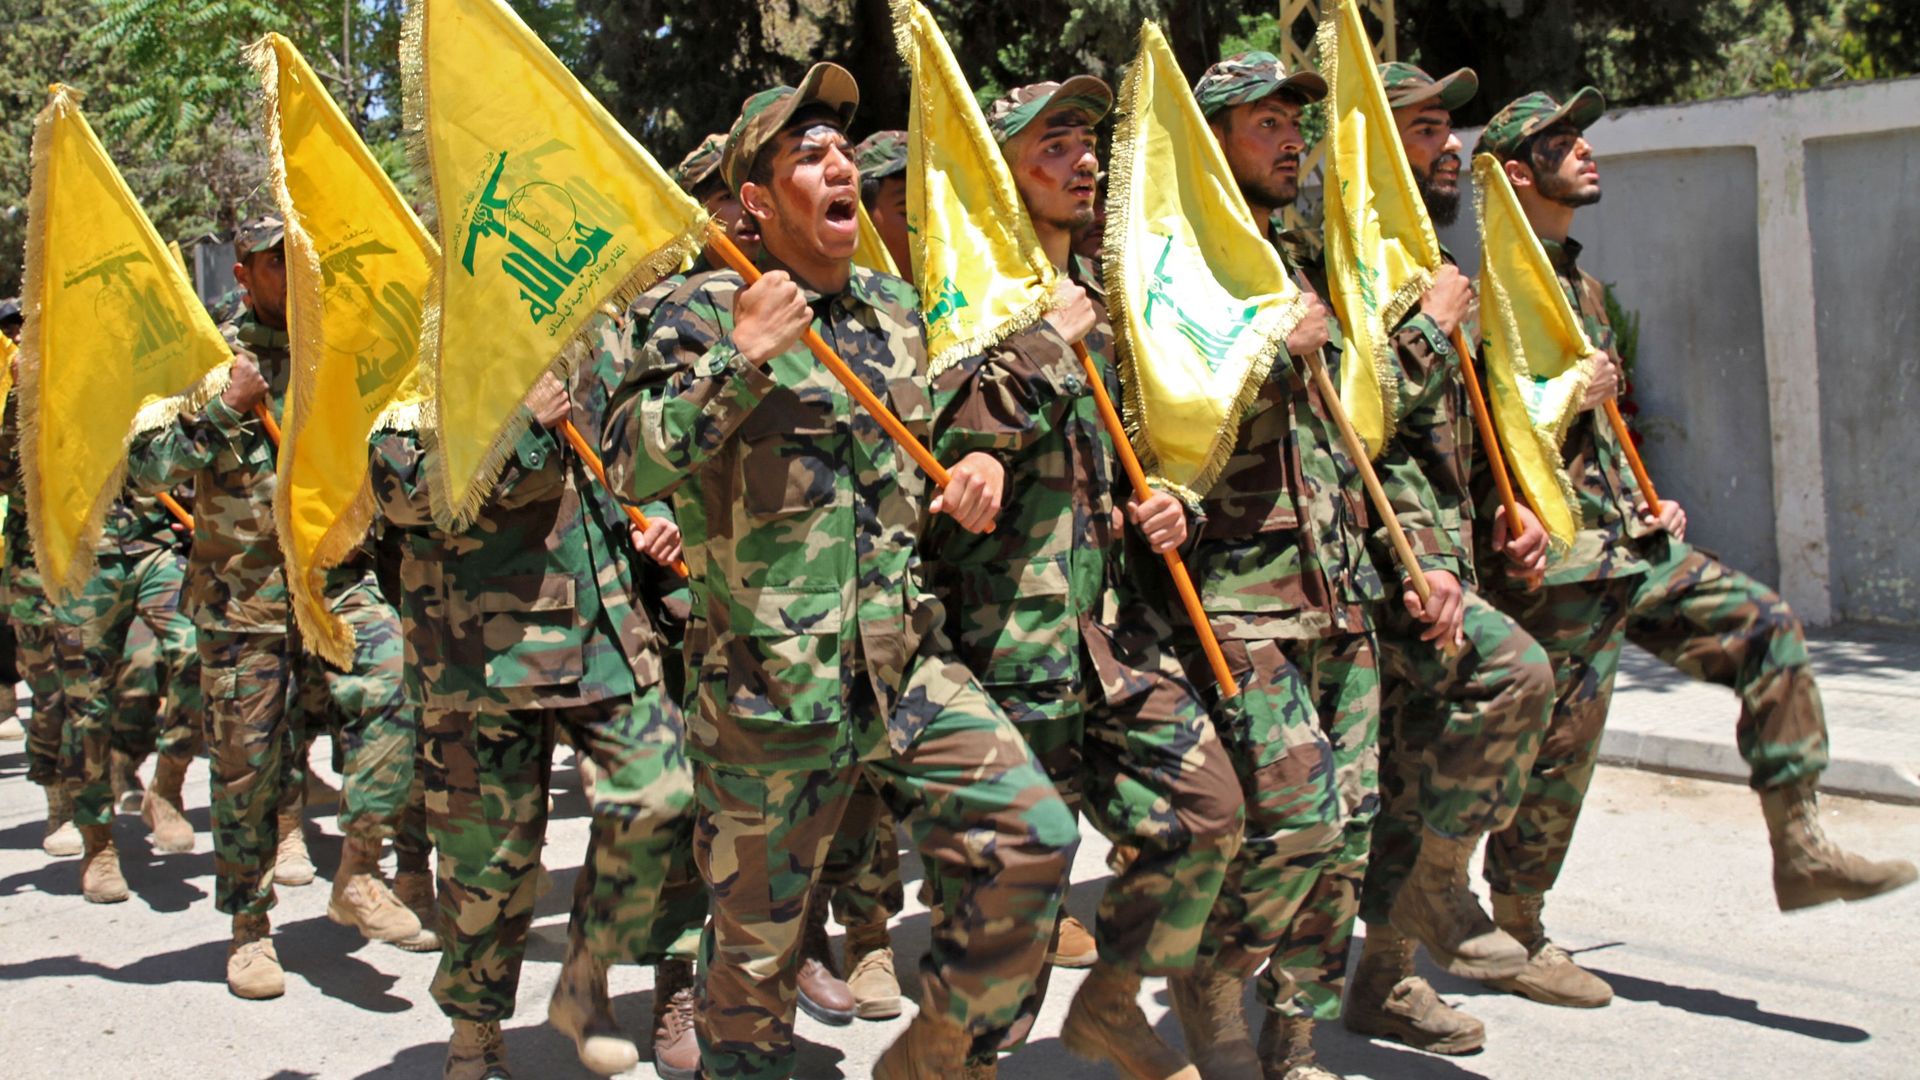 Hezbollah fighters take part in a parade in May. Photo: AFP via Getty Images